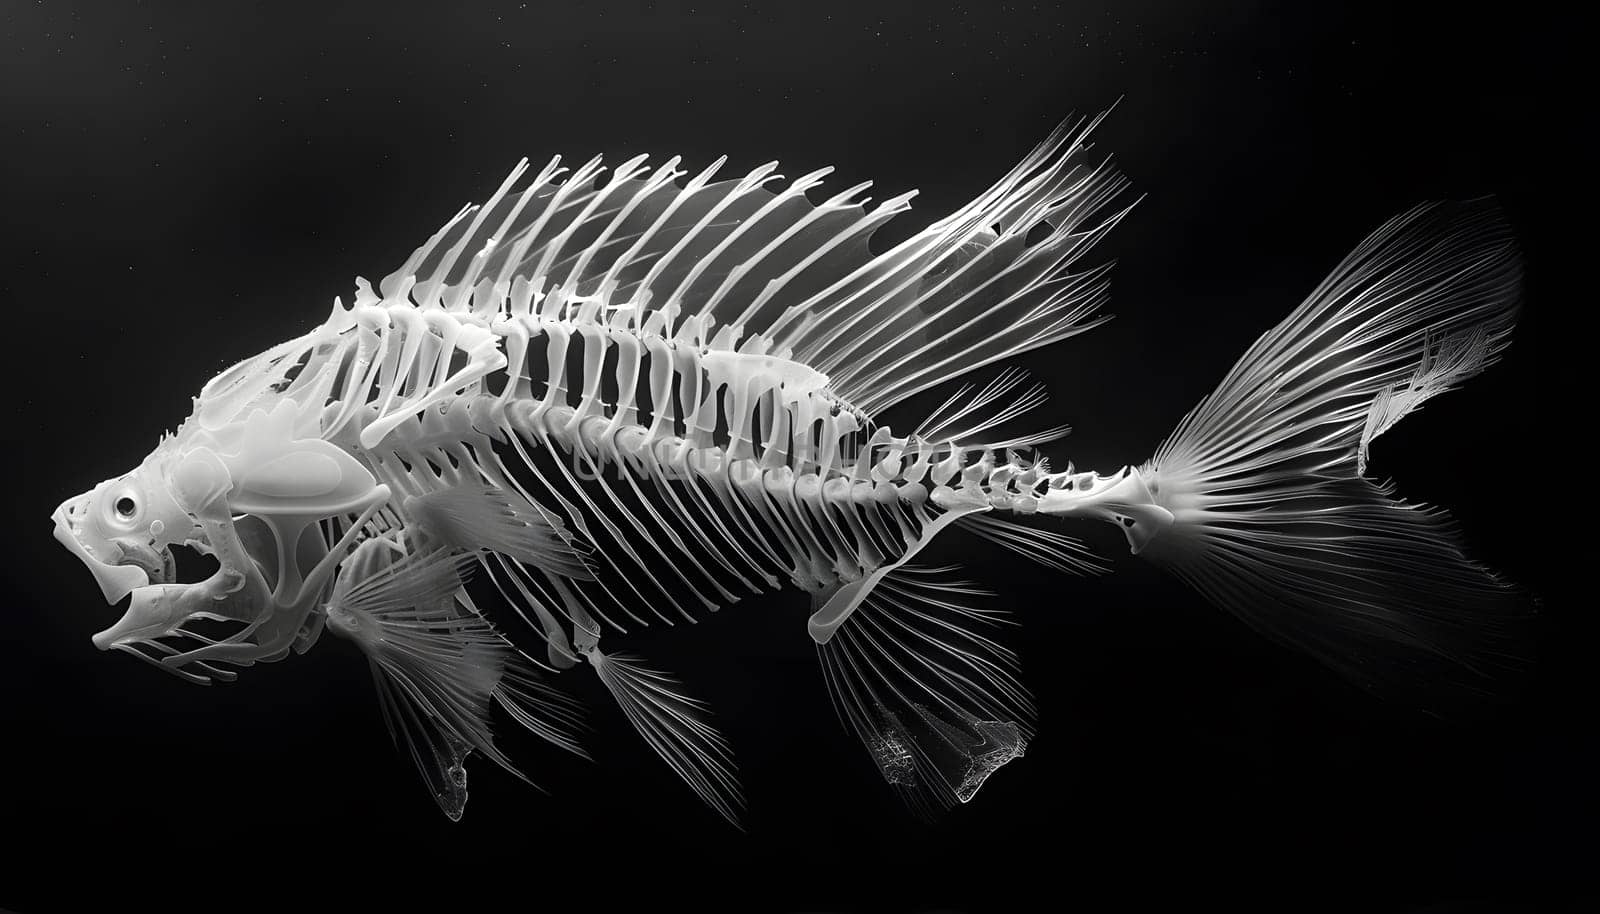 A black and white photo showcases the skeleton of a fish, highlighting its fin, tail, and electric blue color. The image is reminiscent of marine biology studies and monochrome photography